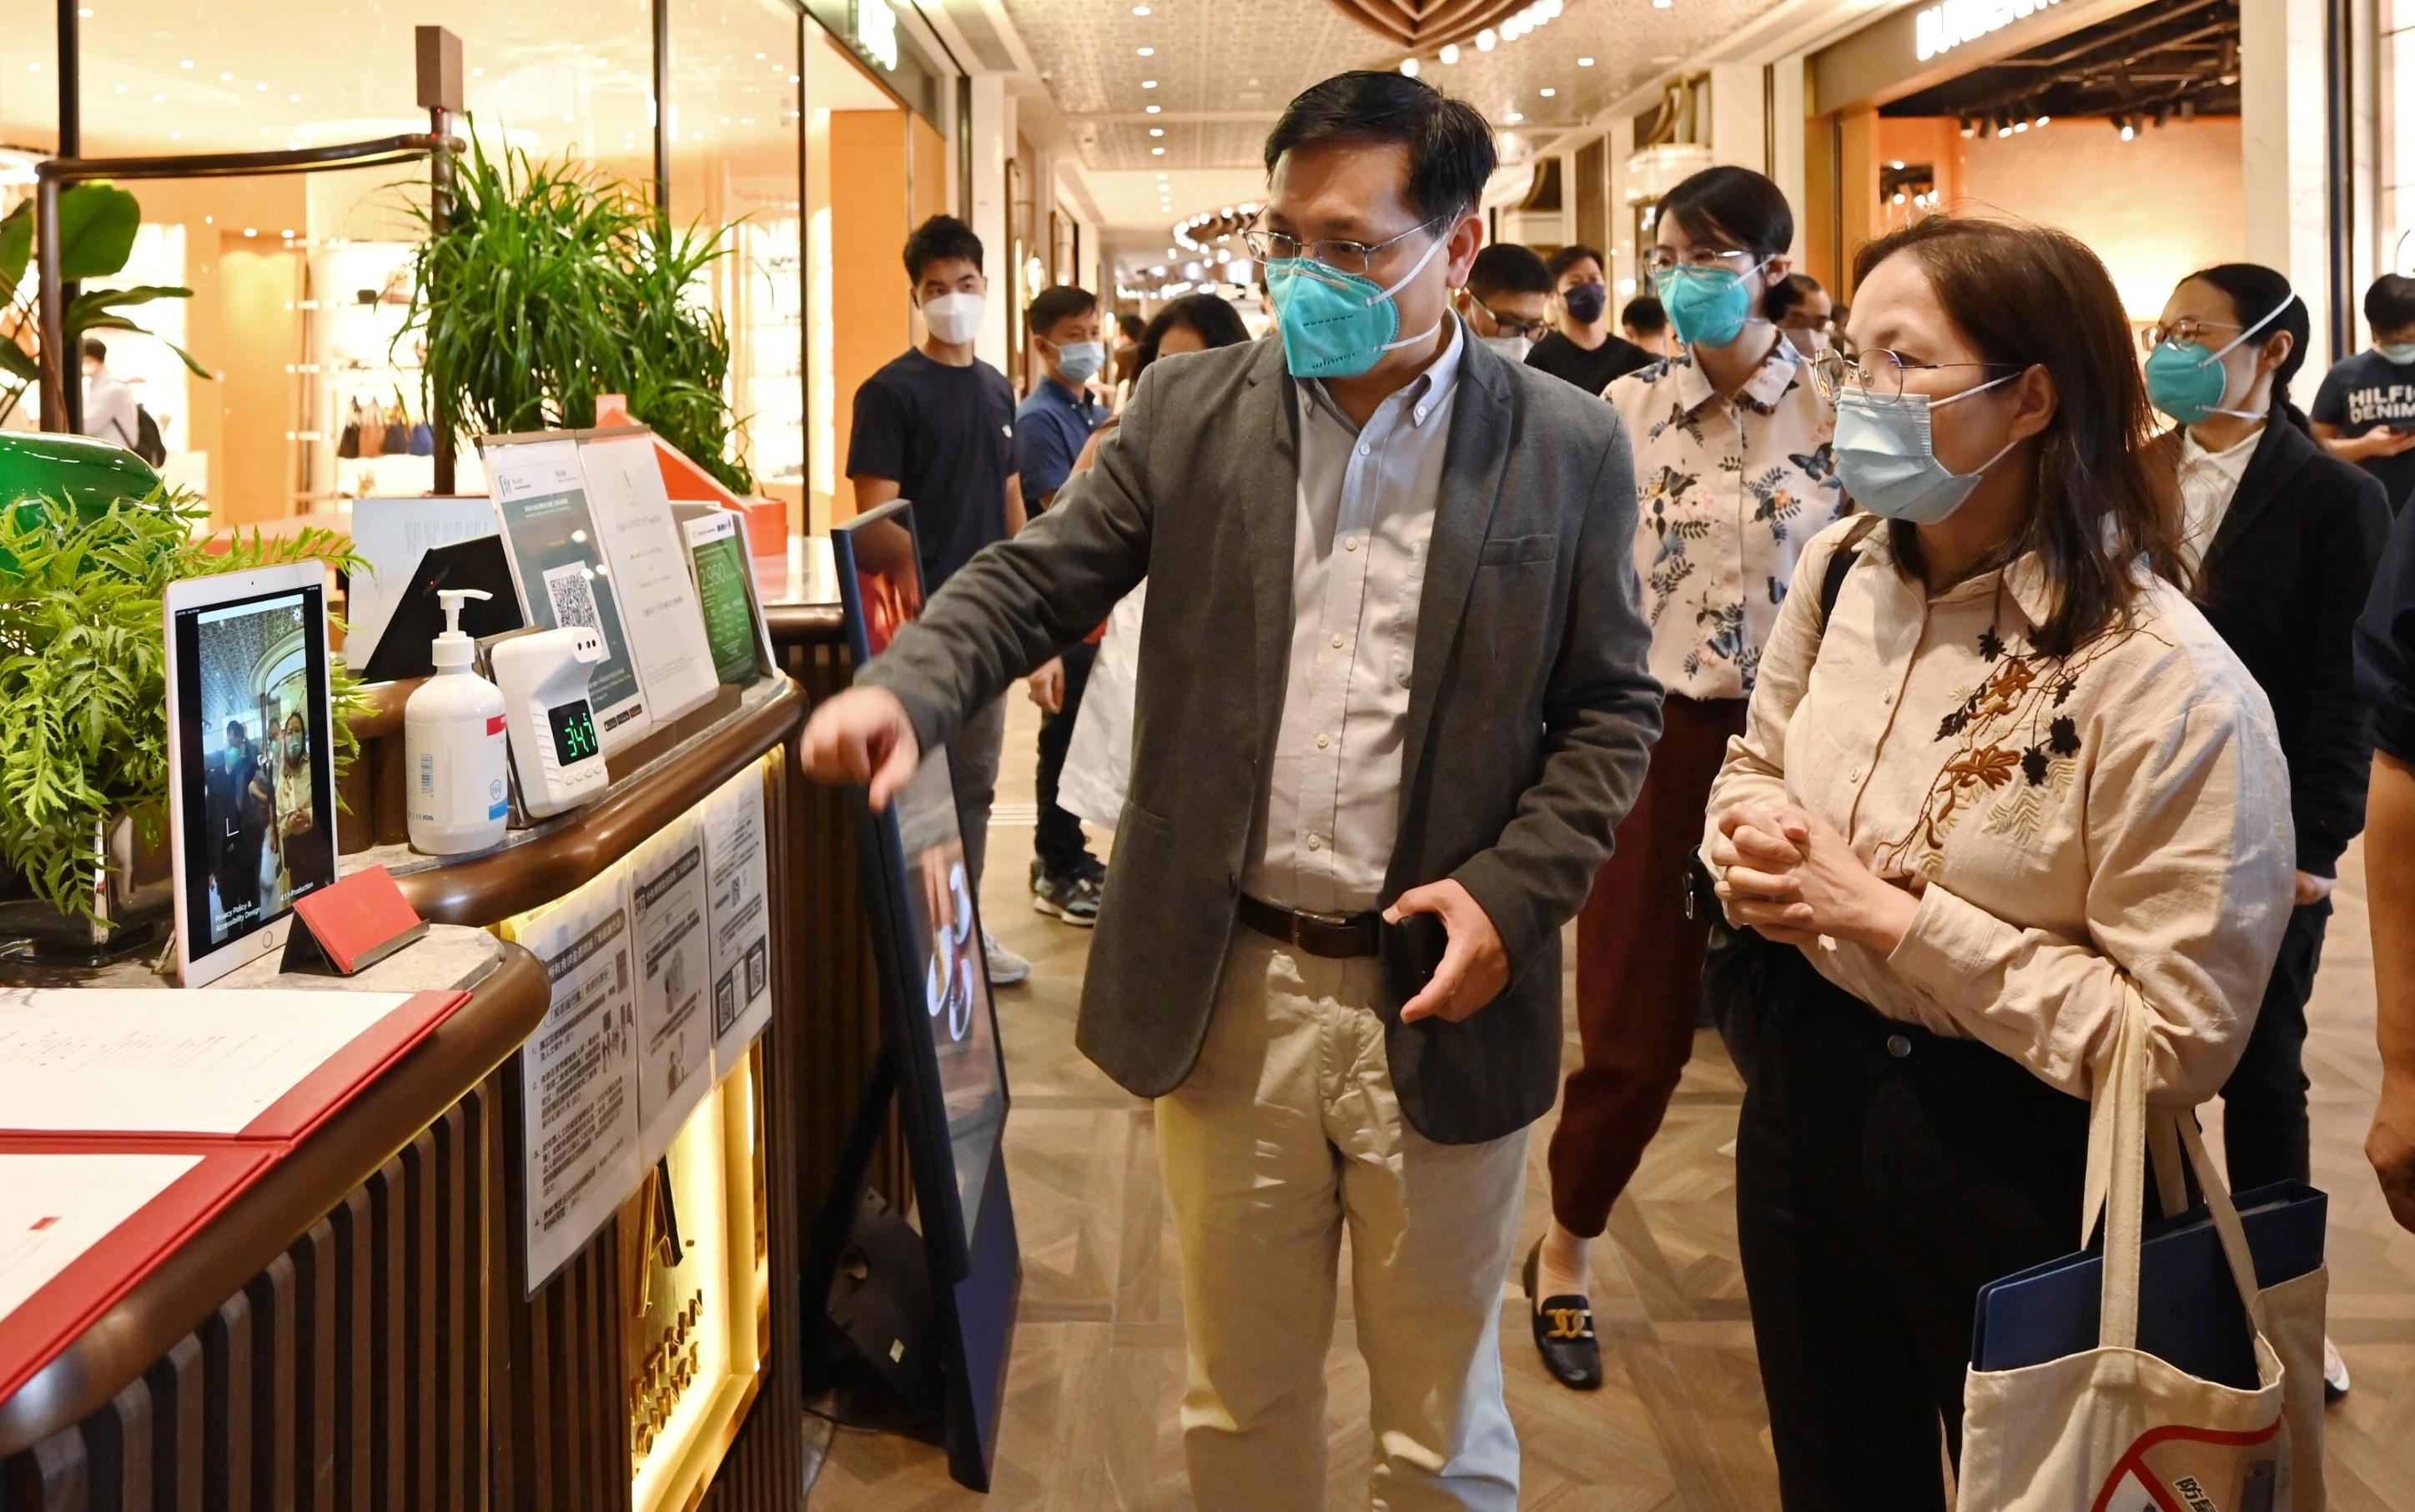 The Deputy Director of Food and Environmental Hygiene, Miss Diane Wong (right), today (April 10) accompanied the Mainland delegation of epidemic prevention and control experts led by the Director of the National Institute for Communicable Disease Control and Prevention of the Chinese Center for Disease Control and Prevention, Mr Kan Biao (left), to visit a shopping mall in Tsim Sha Tsui to inspect the compliance of applicable requirements under the Prevention and Control of Disease (Requirements and Directions) (Business and Premises) Regulation (Cap. 599F) by catering premises inside the mall.